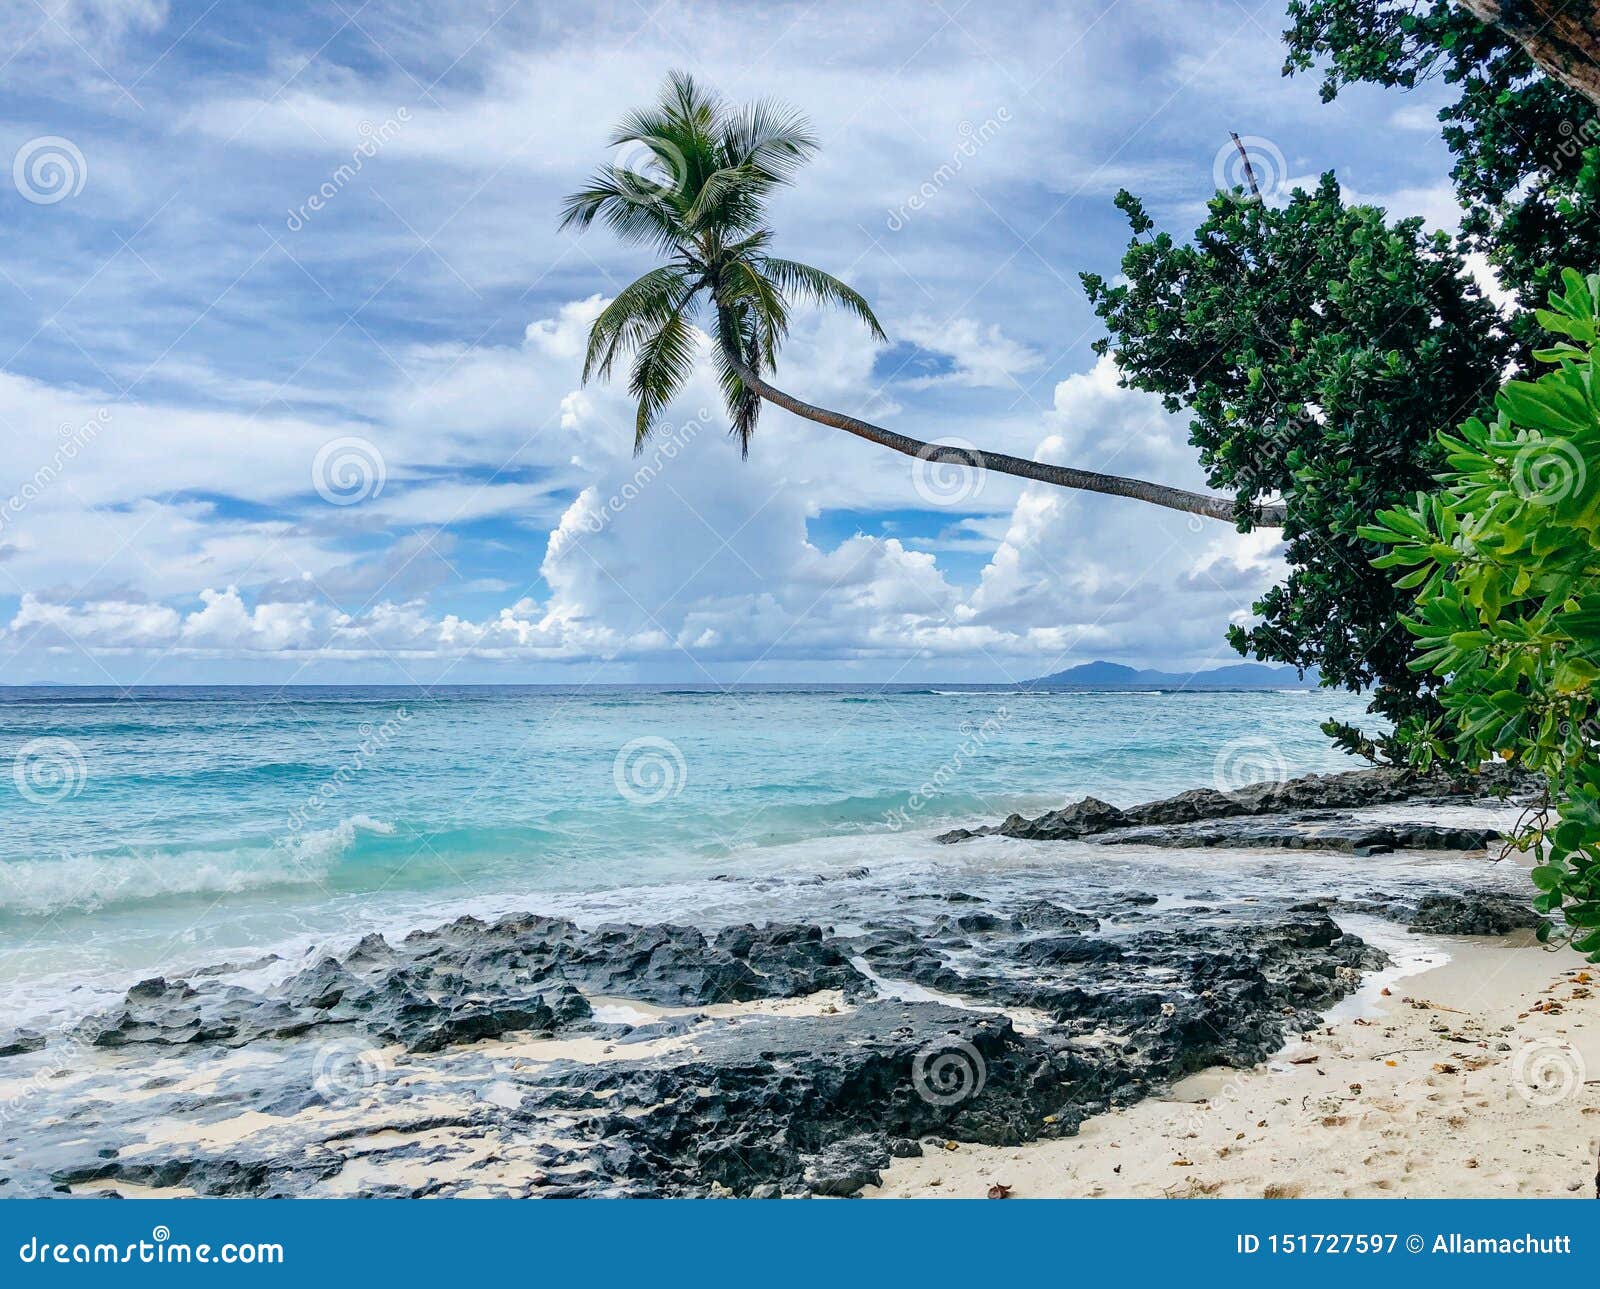 Seychelles Silhouette Island beach. Beautiful beach in Seychelles with rocks and palm trees, blue Indian Ocean and picturesque sky.